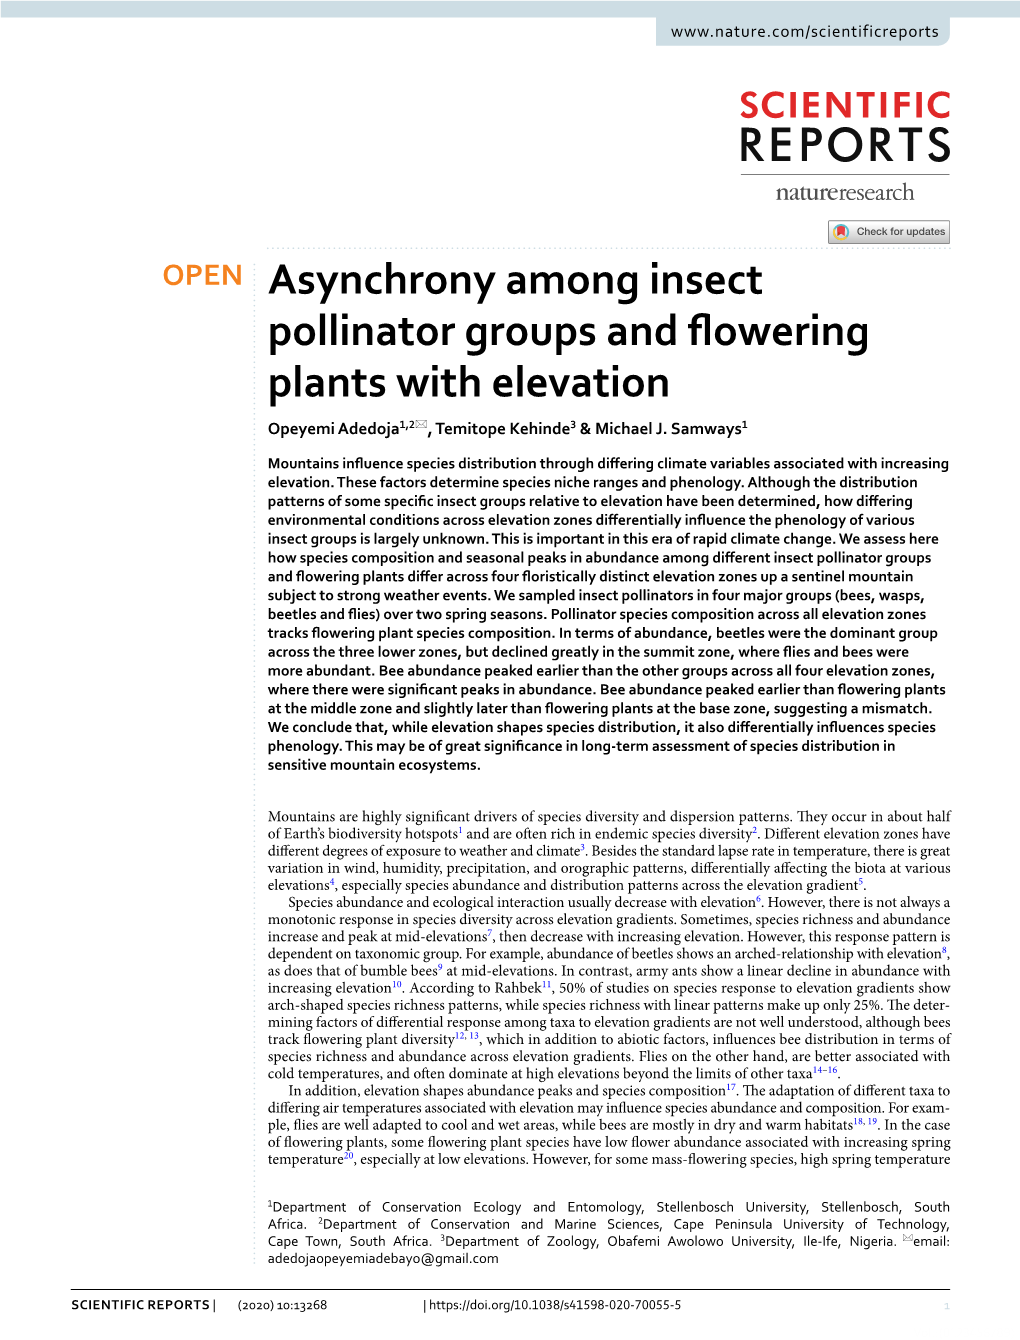 Asynchrony Among Insect Pollinator Groups and Flowering Plants With